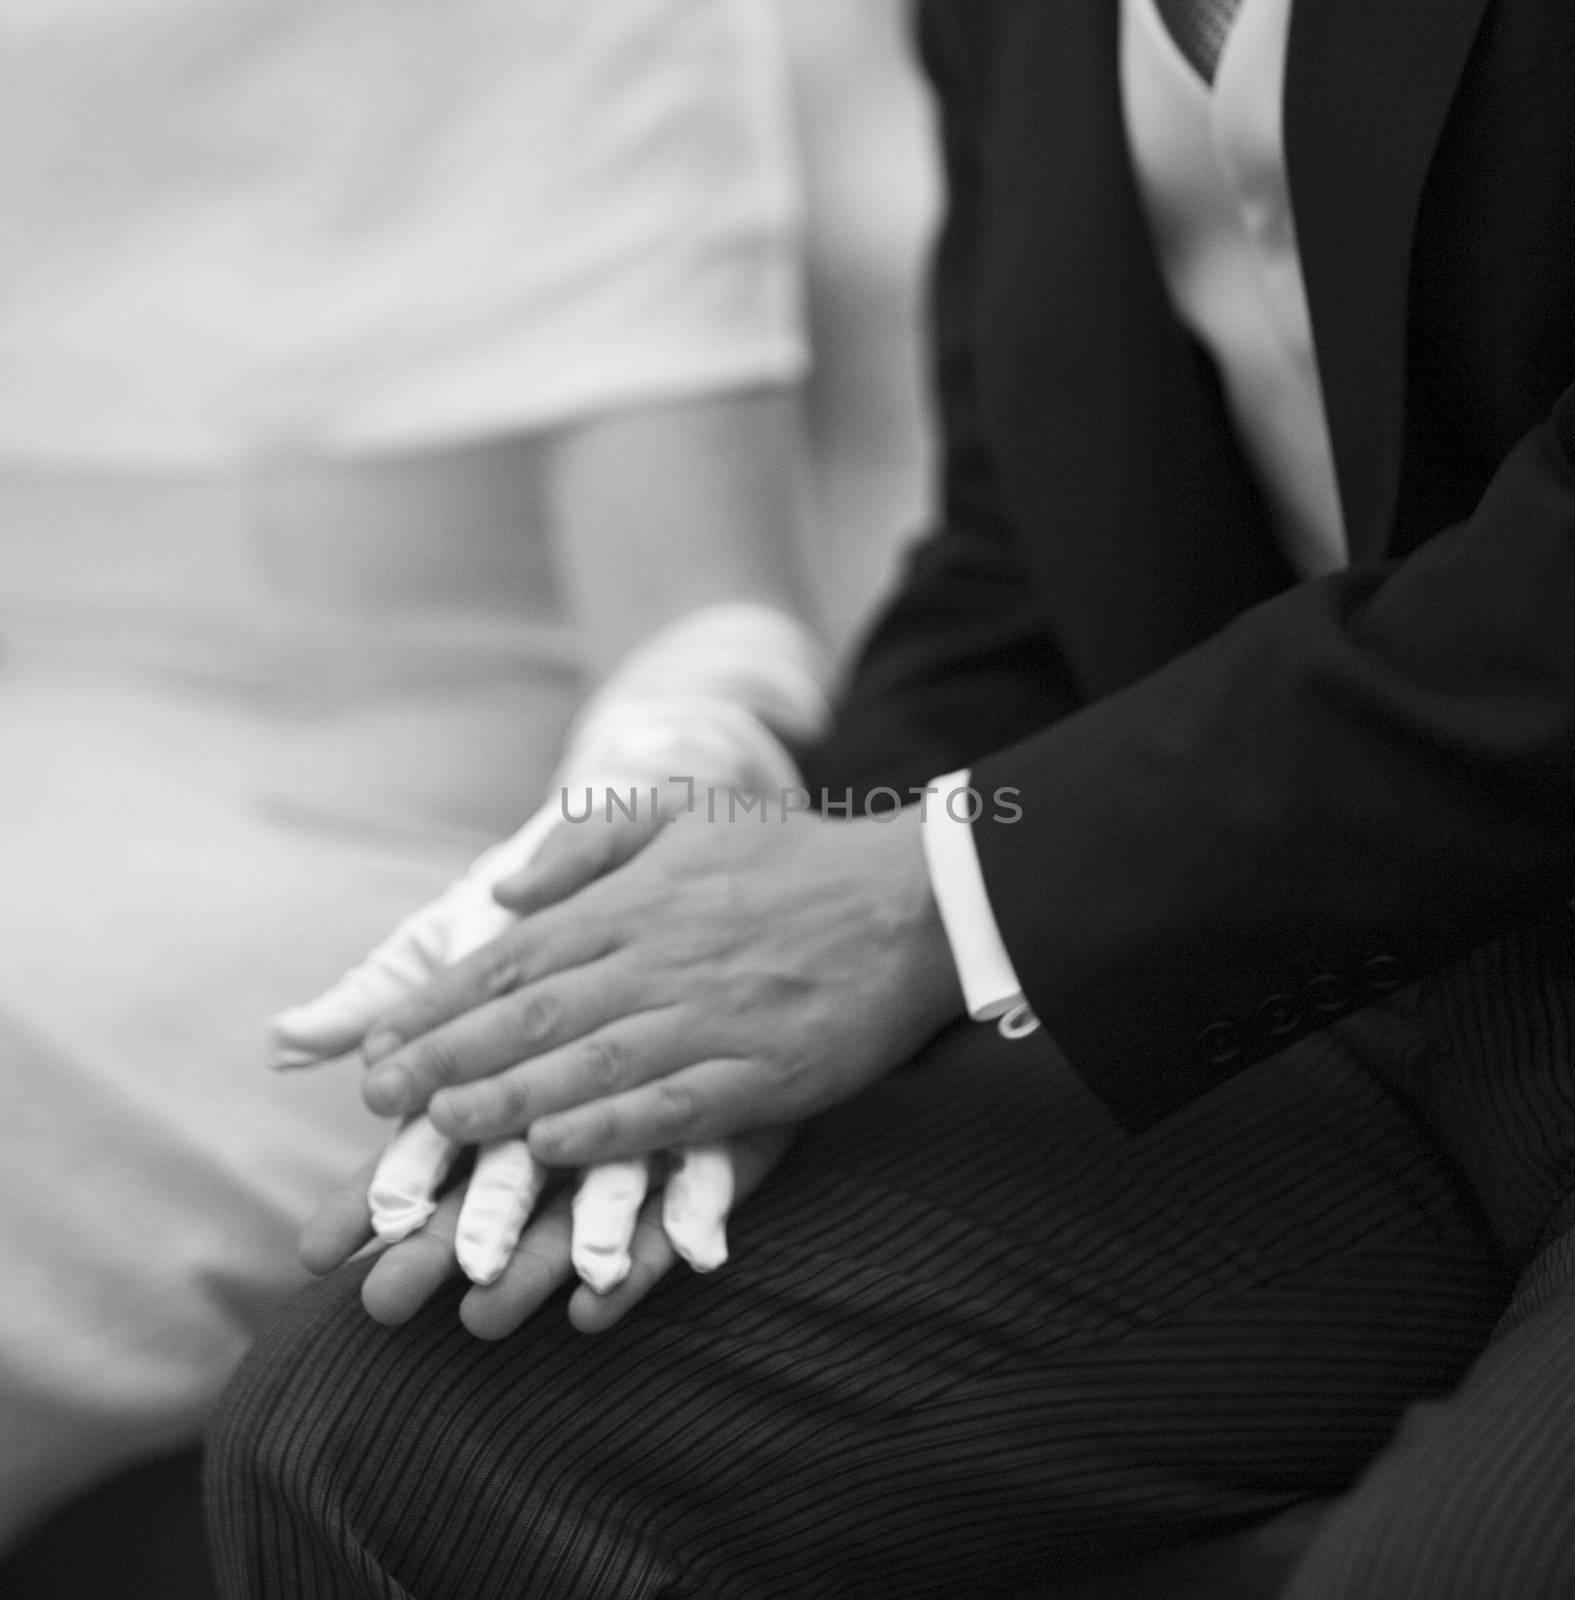 Black and white artistic digital square photo of hand of bridegroom in dark long morning suit and white shirt with cufflinks in church religious wedding marriage ceremony holding hands with the bride in white long wedding bridal dress and white gloves in Barcelona Spain. Shallow depth of with background out of focus.